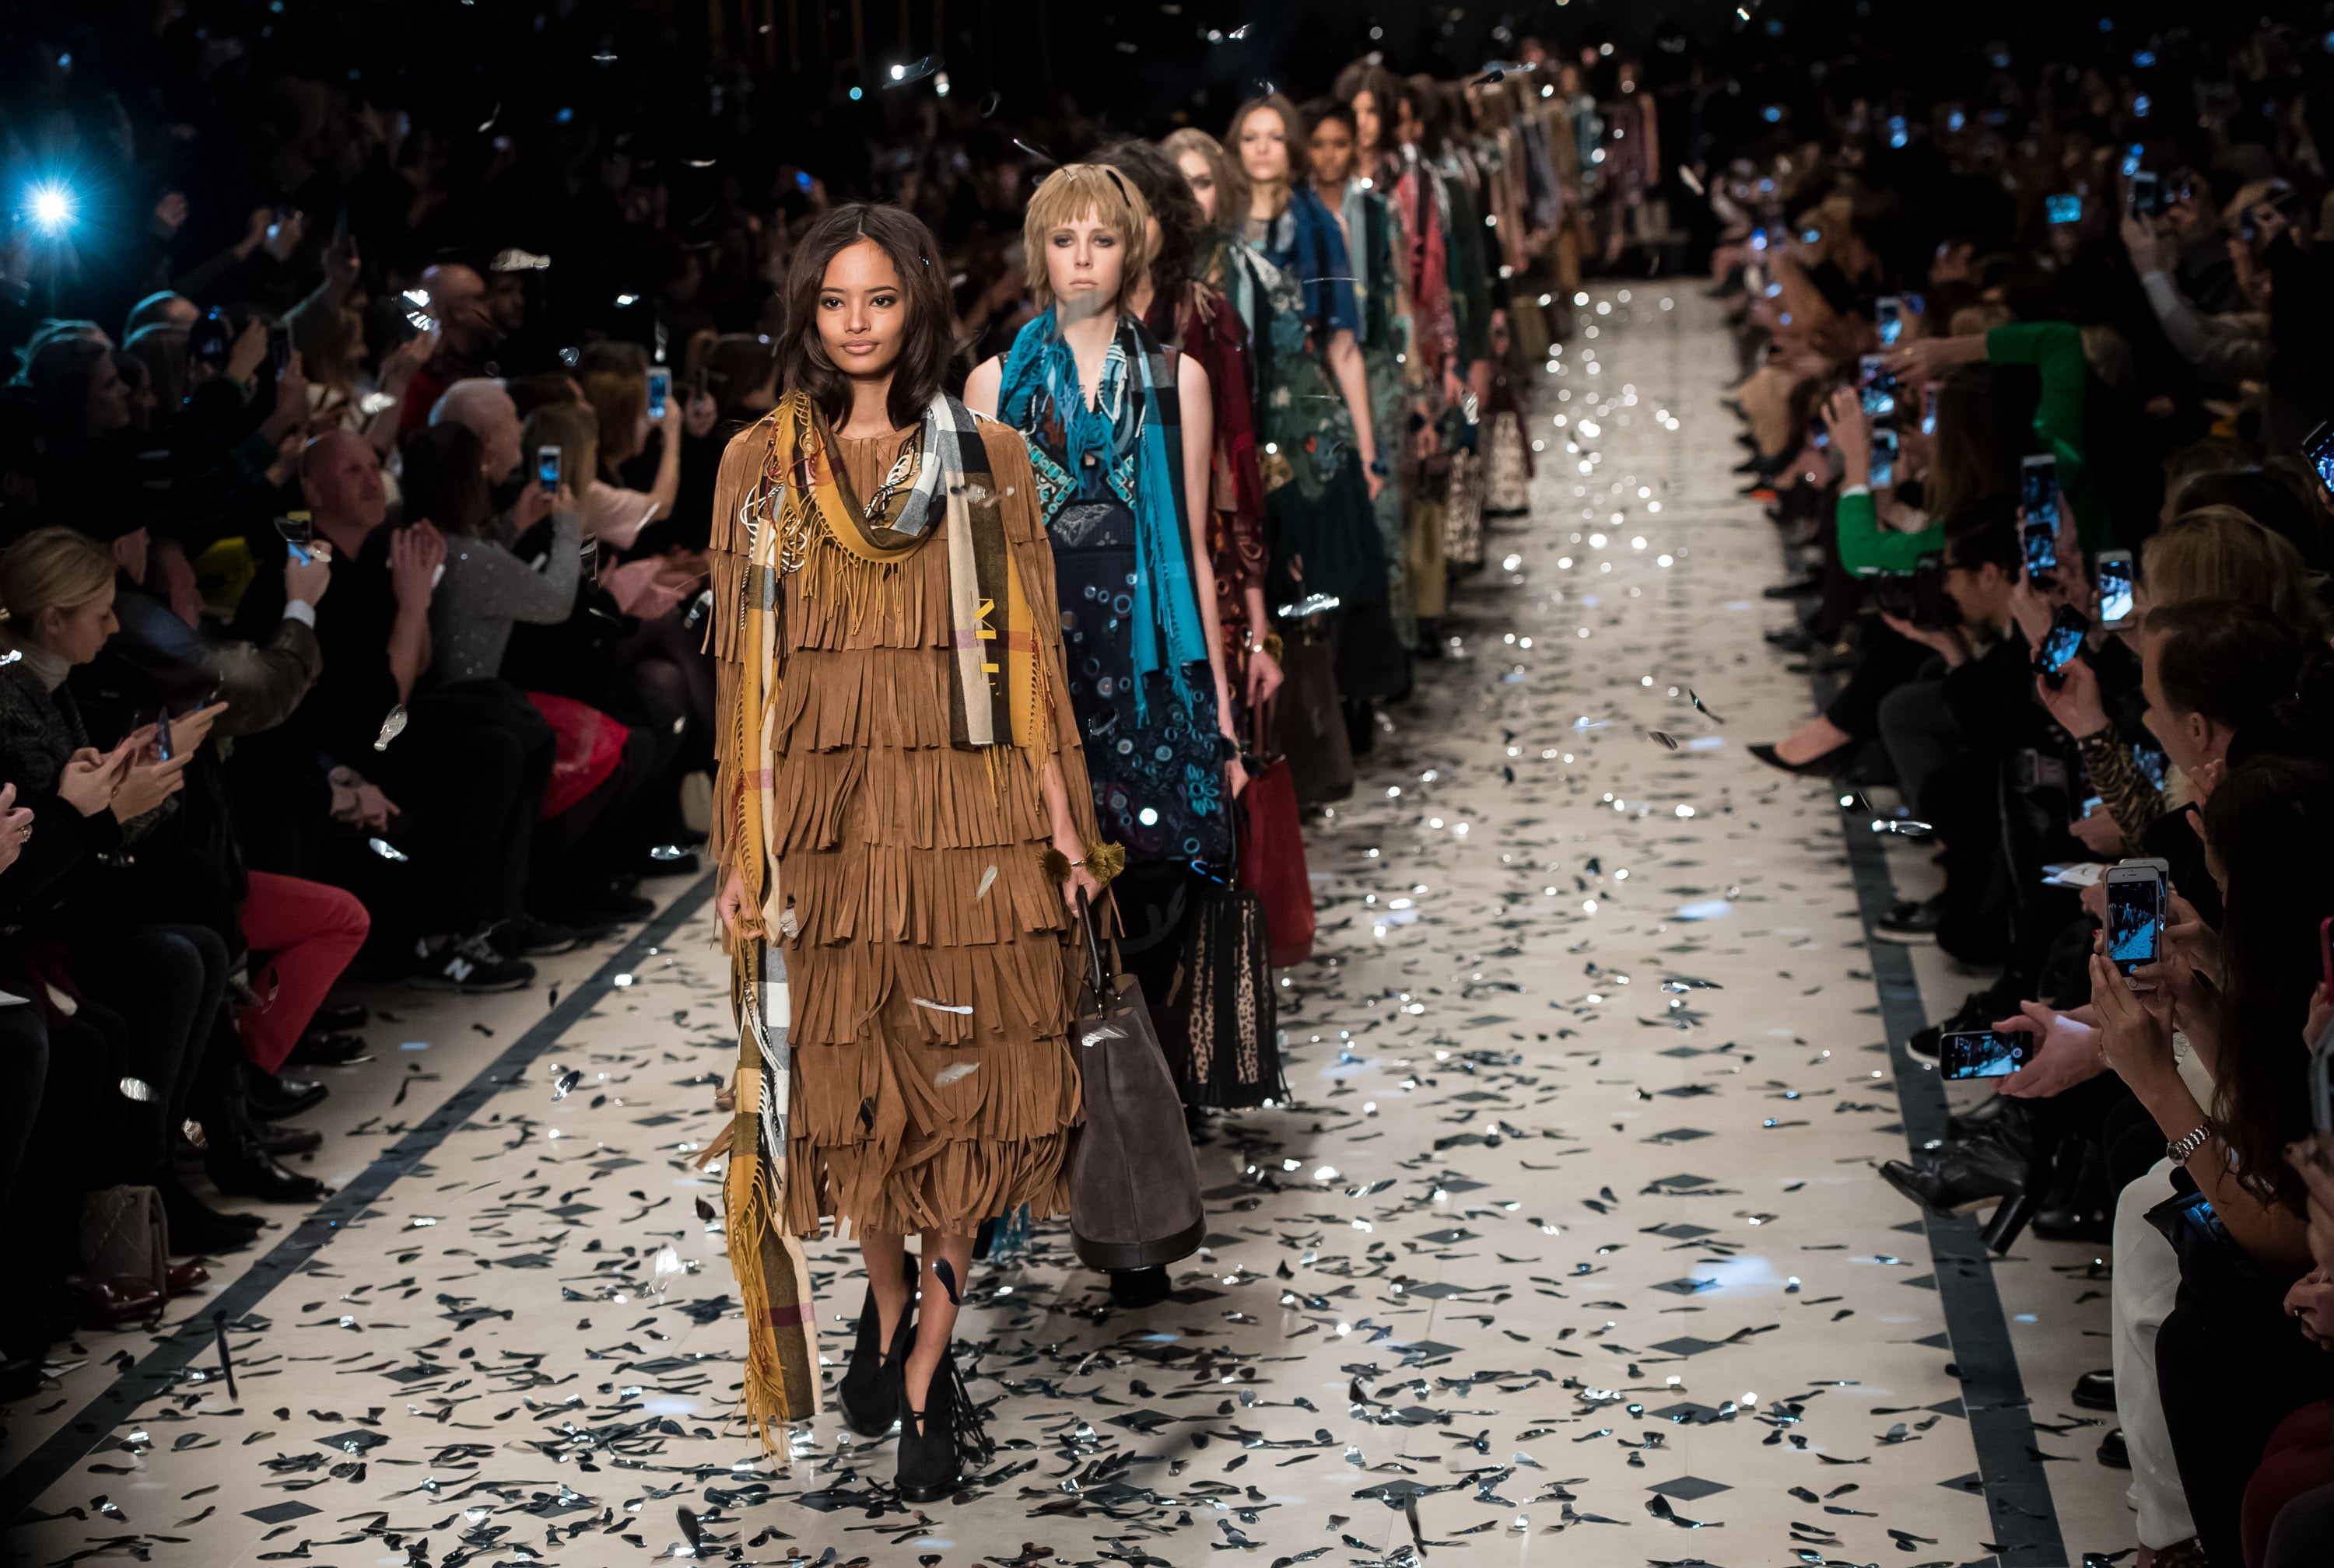 Forget Quality And Sustainability: High Price Drives Consumer Demand For Luxury  Brands